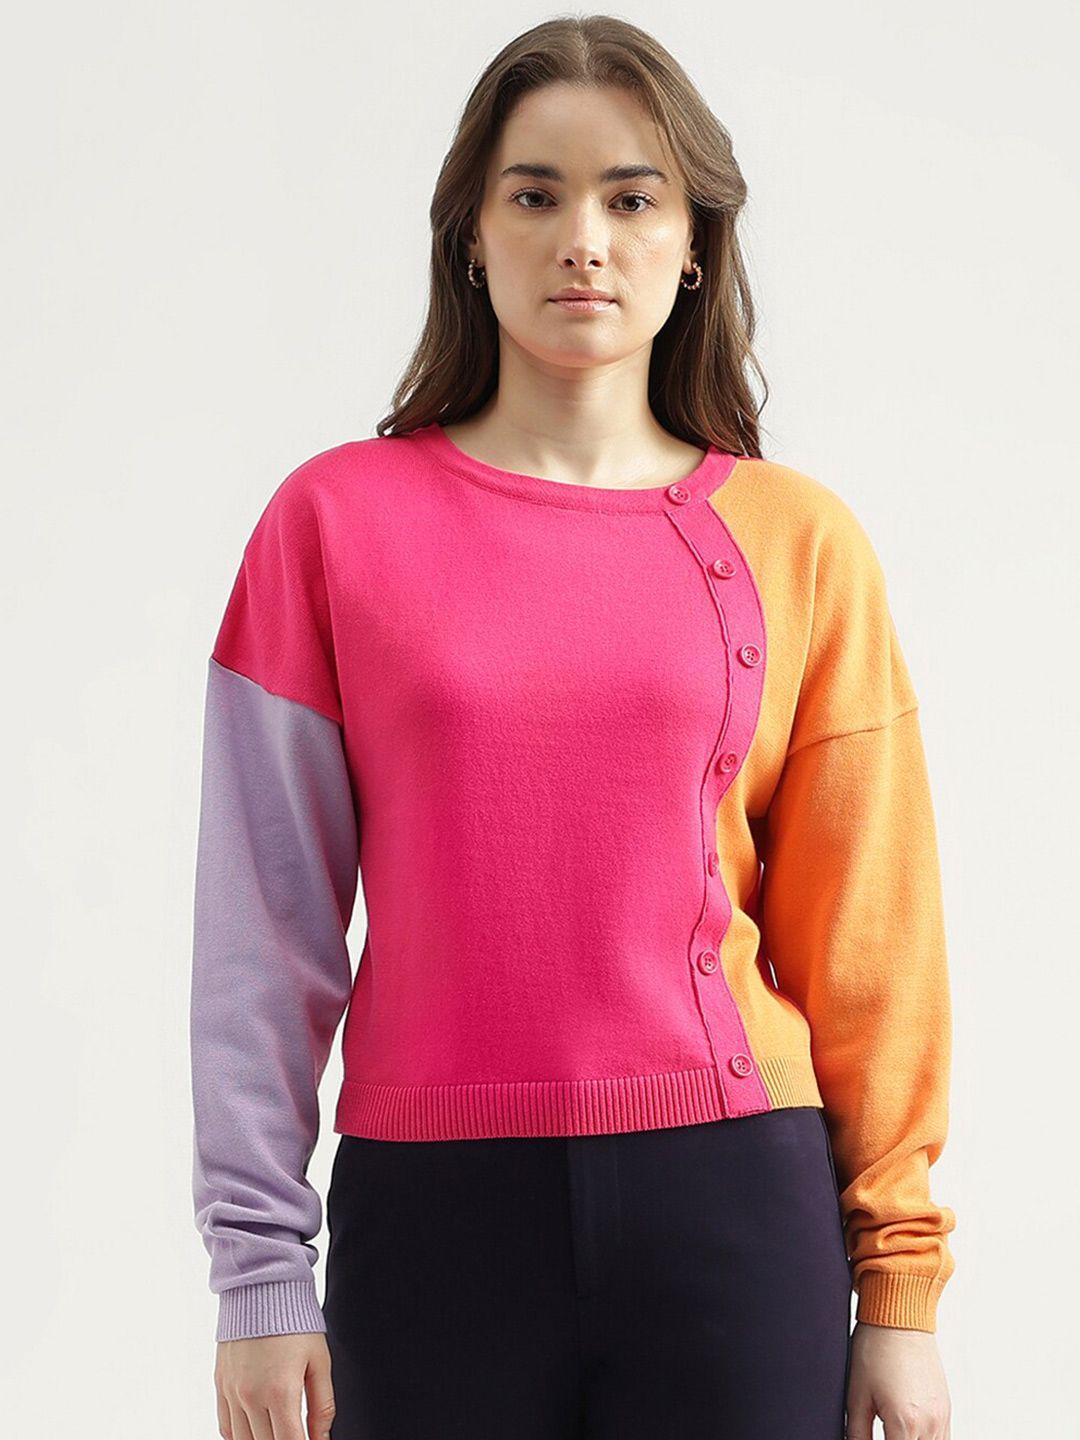 united-colors-of-benetton-colourblocked-ribbed-cotton-pullover-sweater